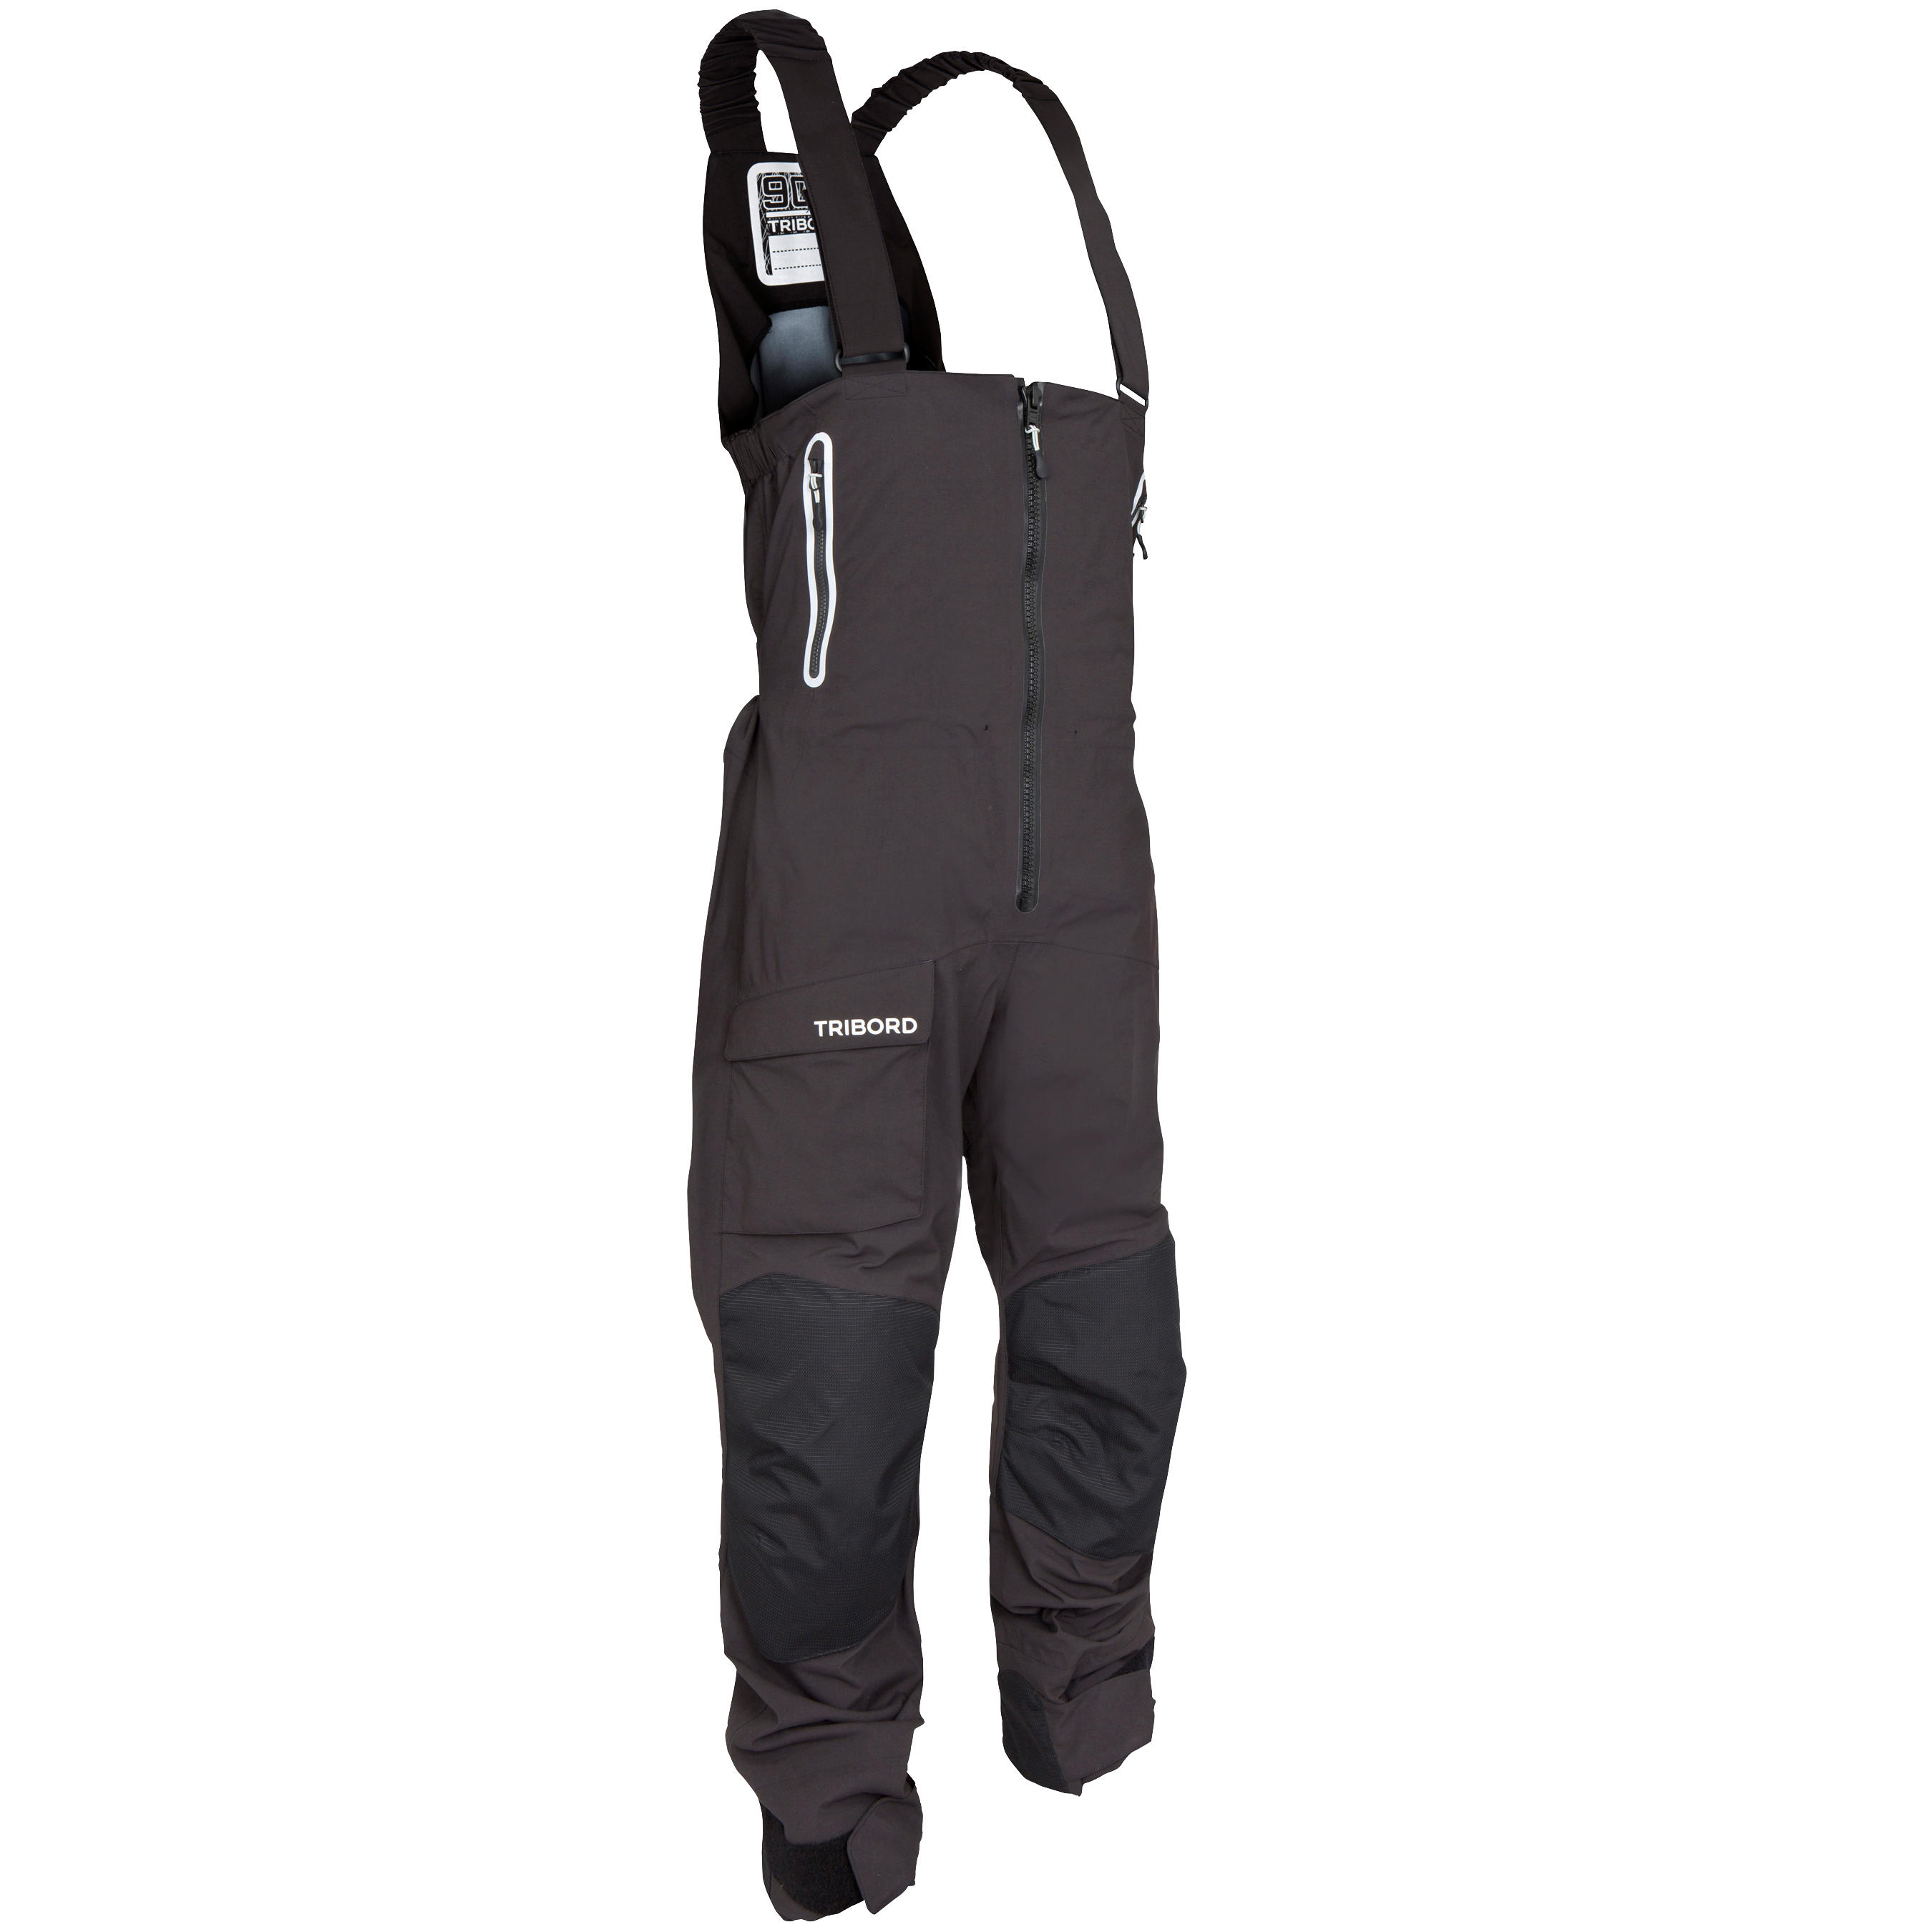 TRIBORD Ozean 900 Men's waterproof and breathable sailing Salopettes - Black